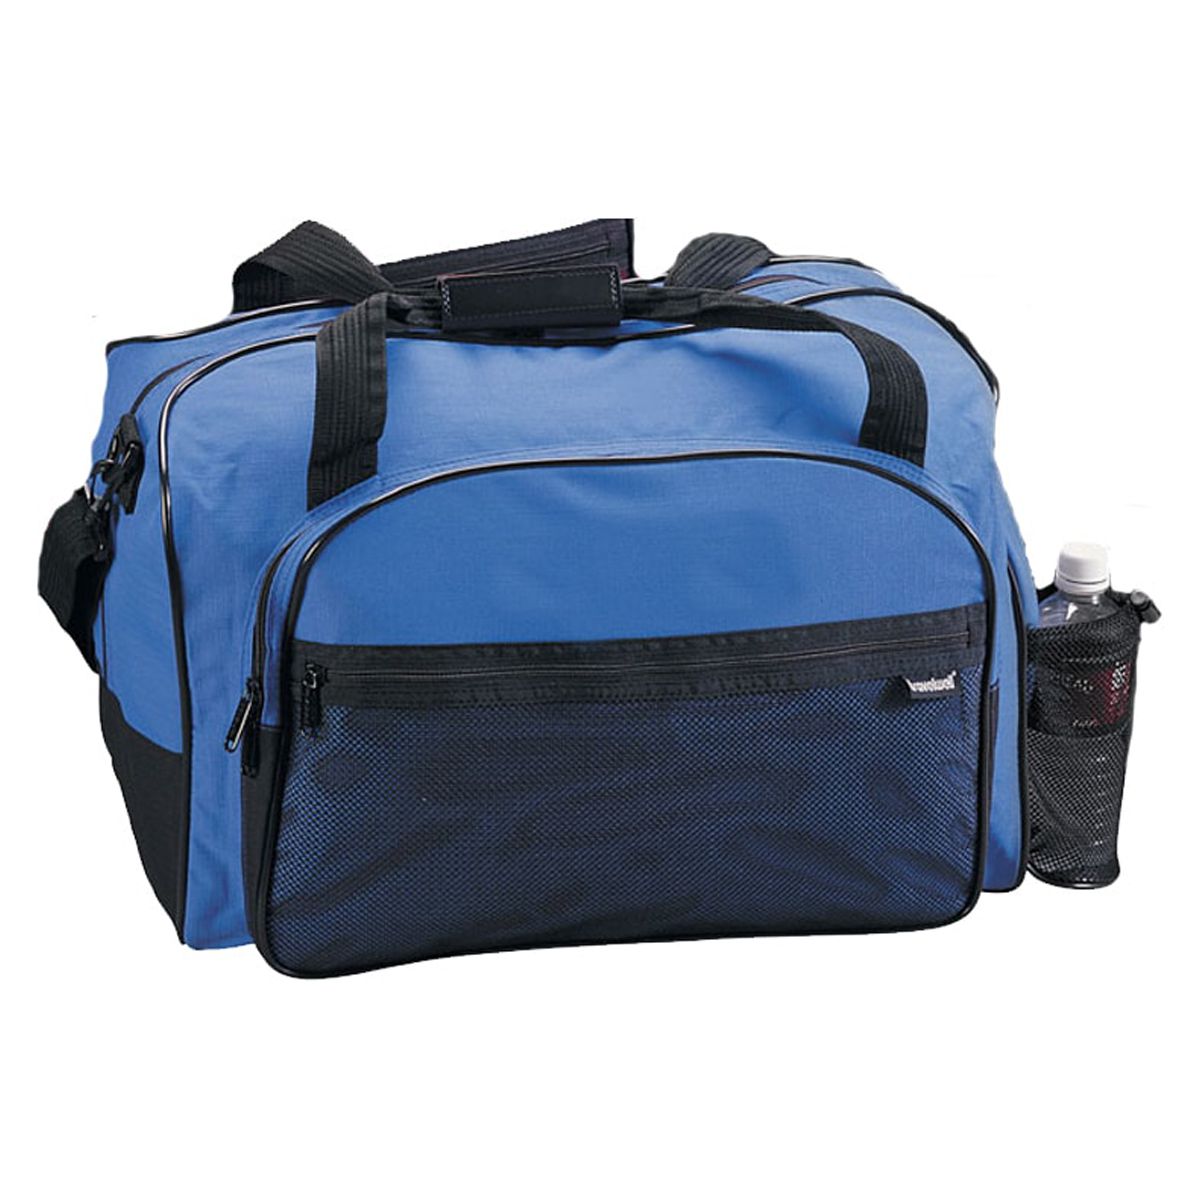 GOODHOPE BAGS Unisex Water Bottle Zip Around Match Sports / Fitness / Work Out Polyester Duffel Storage Bag Blue - image 2 of 3